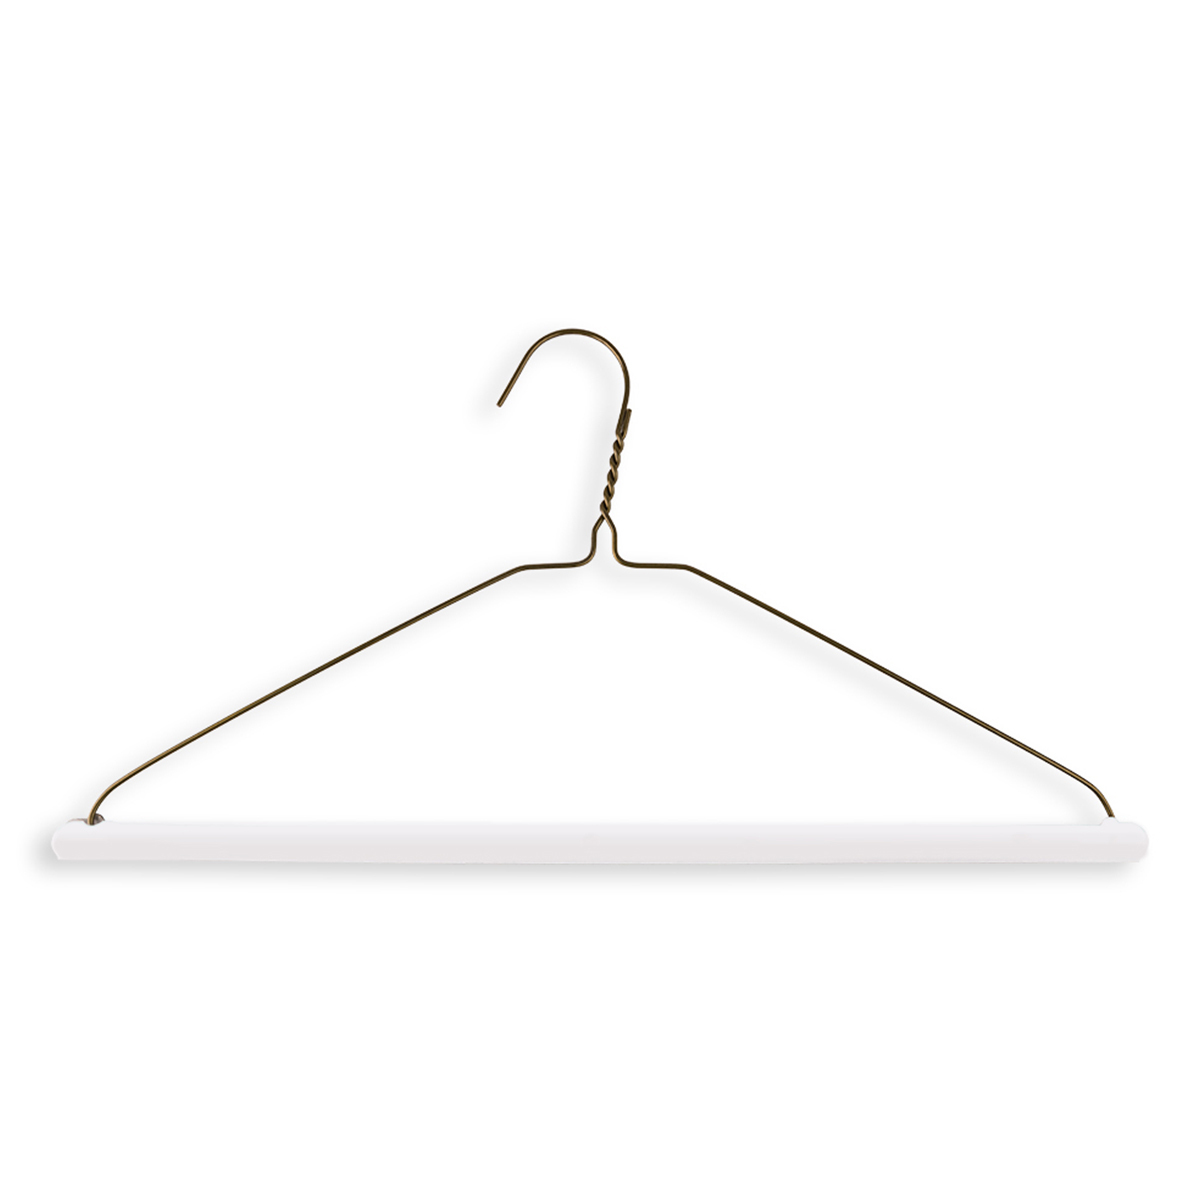 Metal Clothes Hanger - 16 Notched With Loop